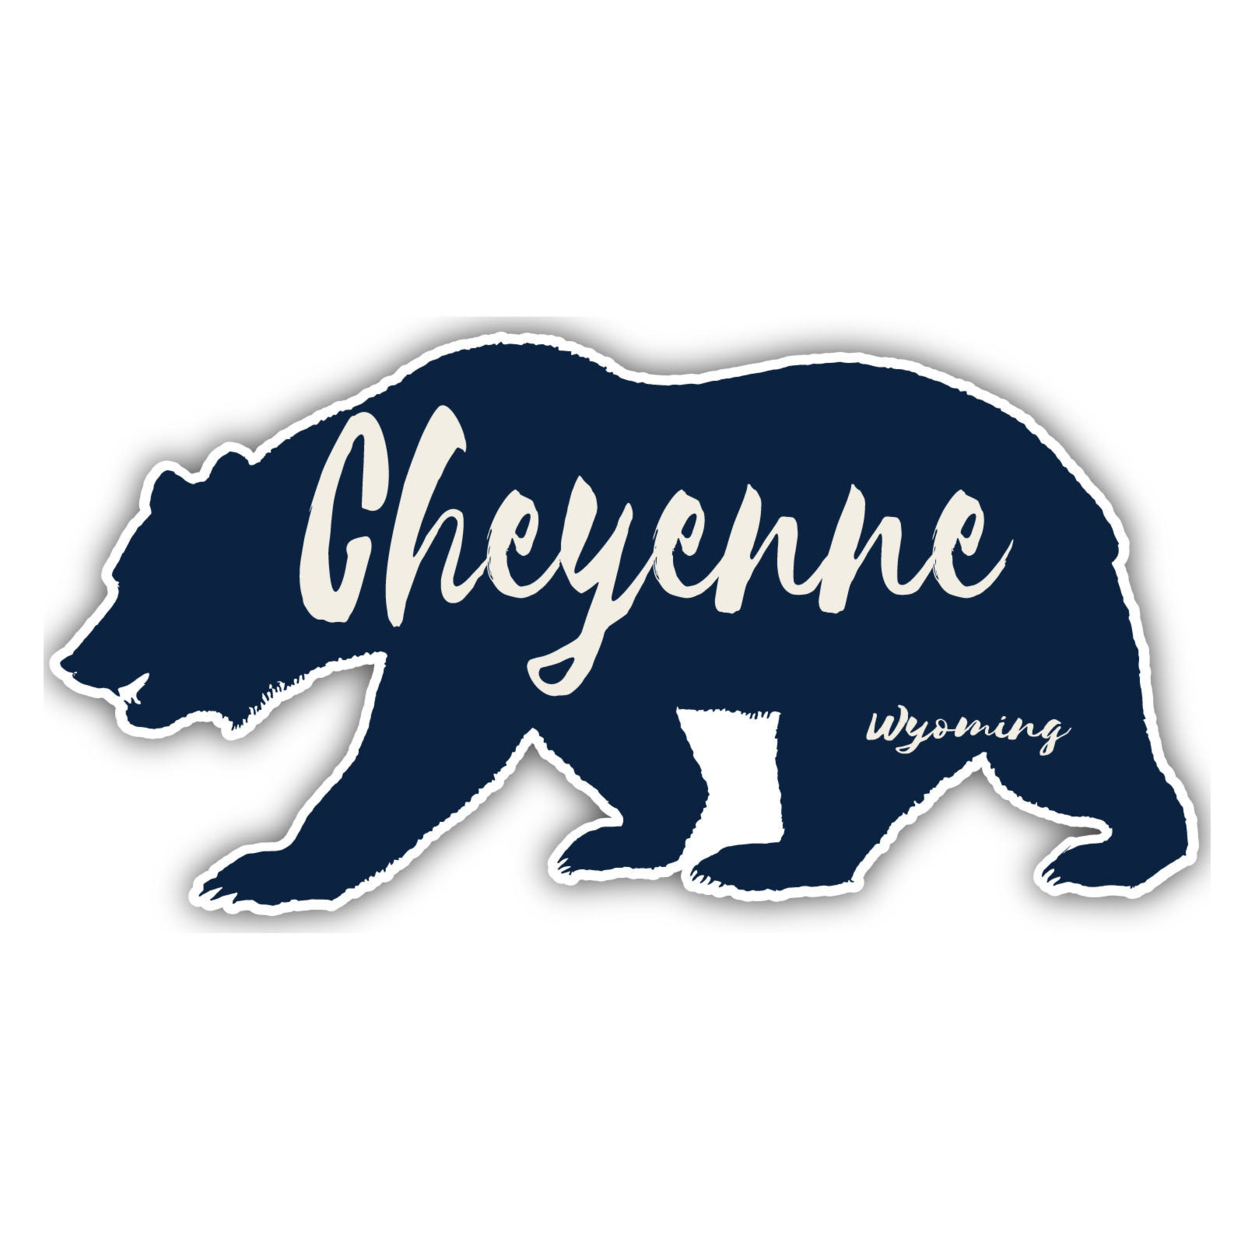 Cheyenne Wyoming Souvenir Decorative Stickers (Choose Theme And Size) - 4-Pack, 2-Inch, Tent